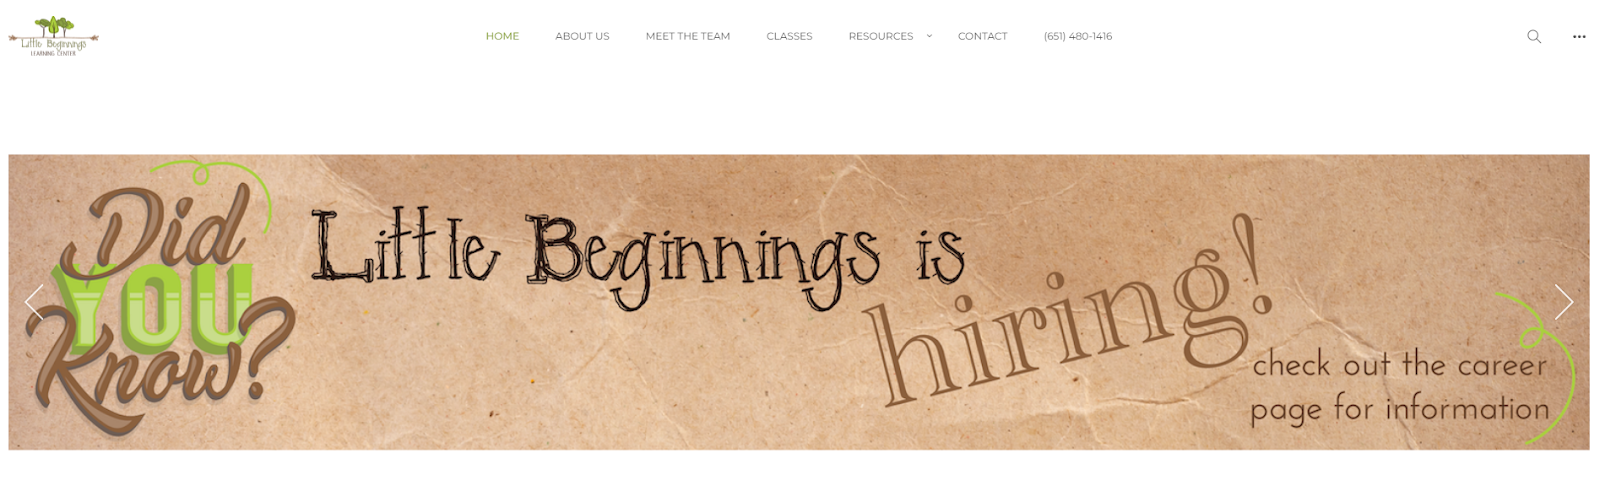 homepage for the daycare website little beginnings learning center